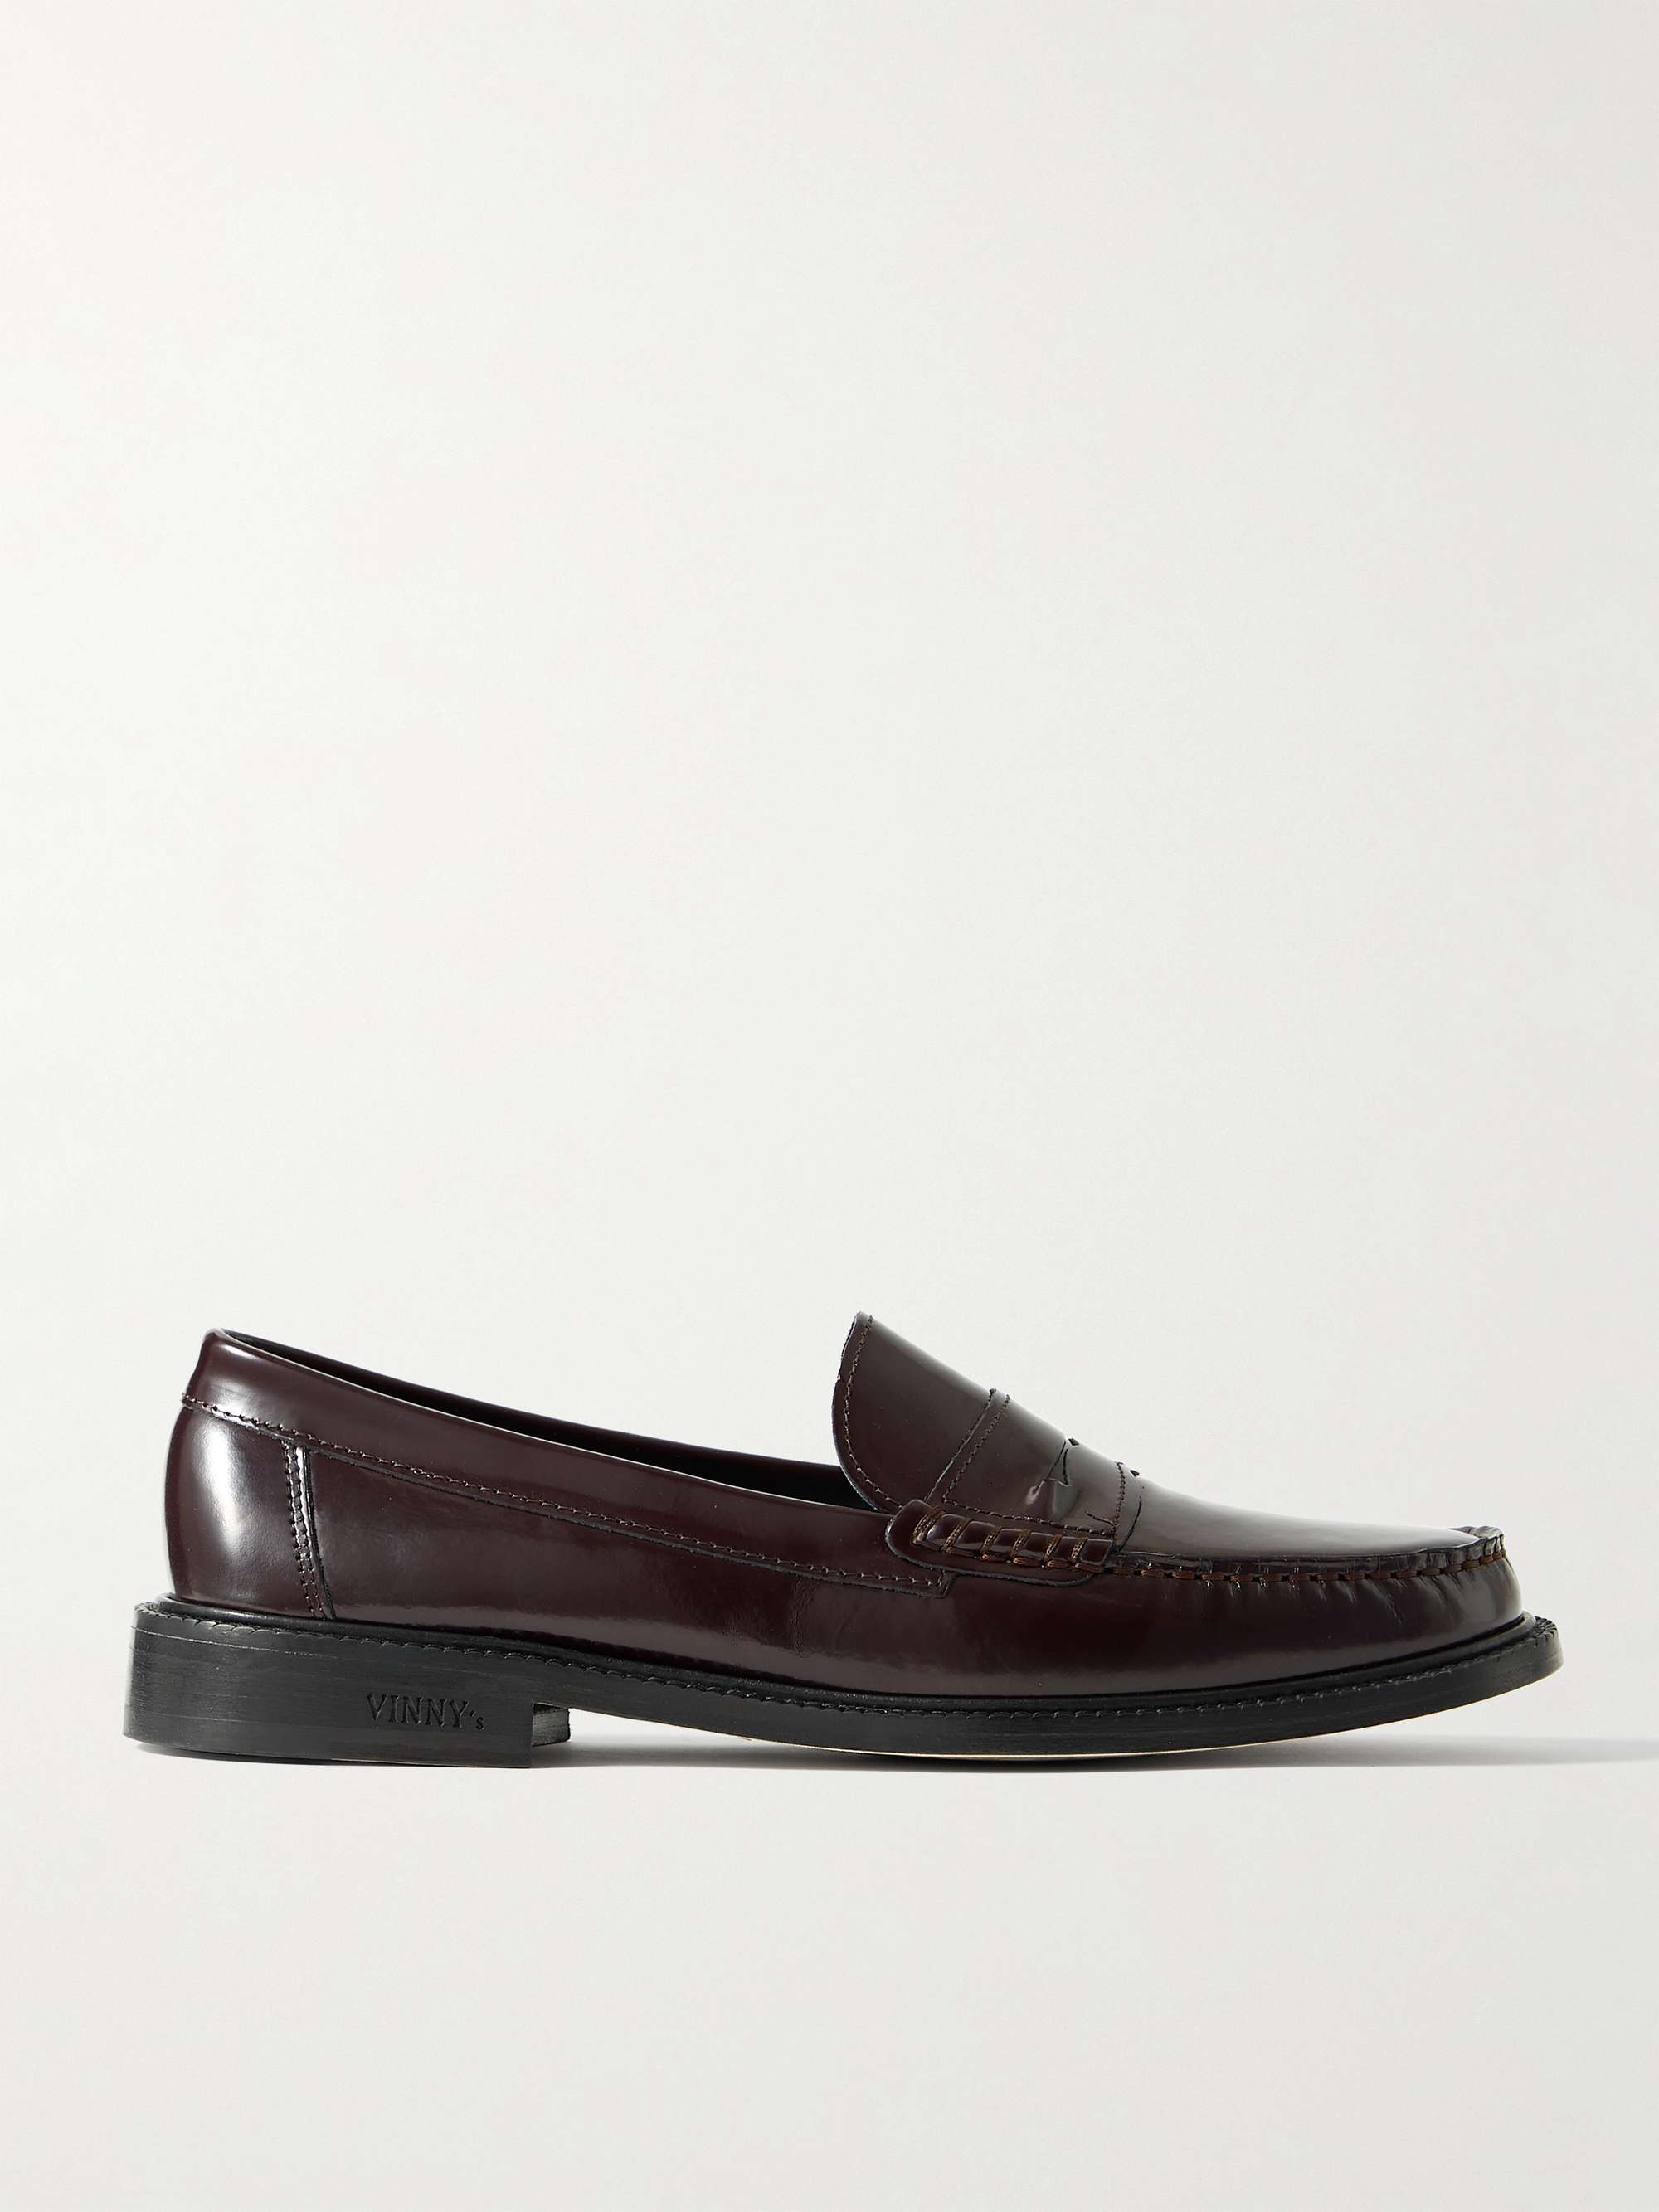 VINNY'S Yardee Leather Penny Loafers for Men | MR PORTER